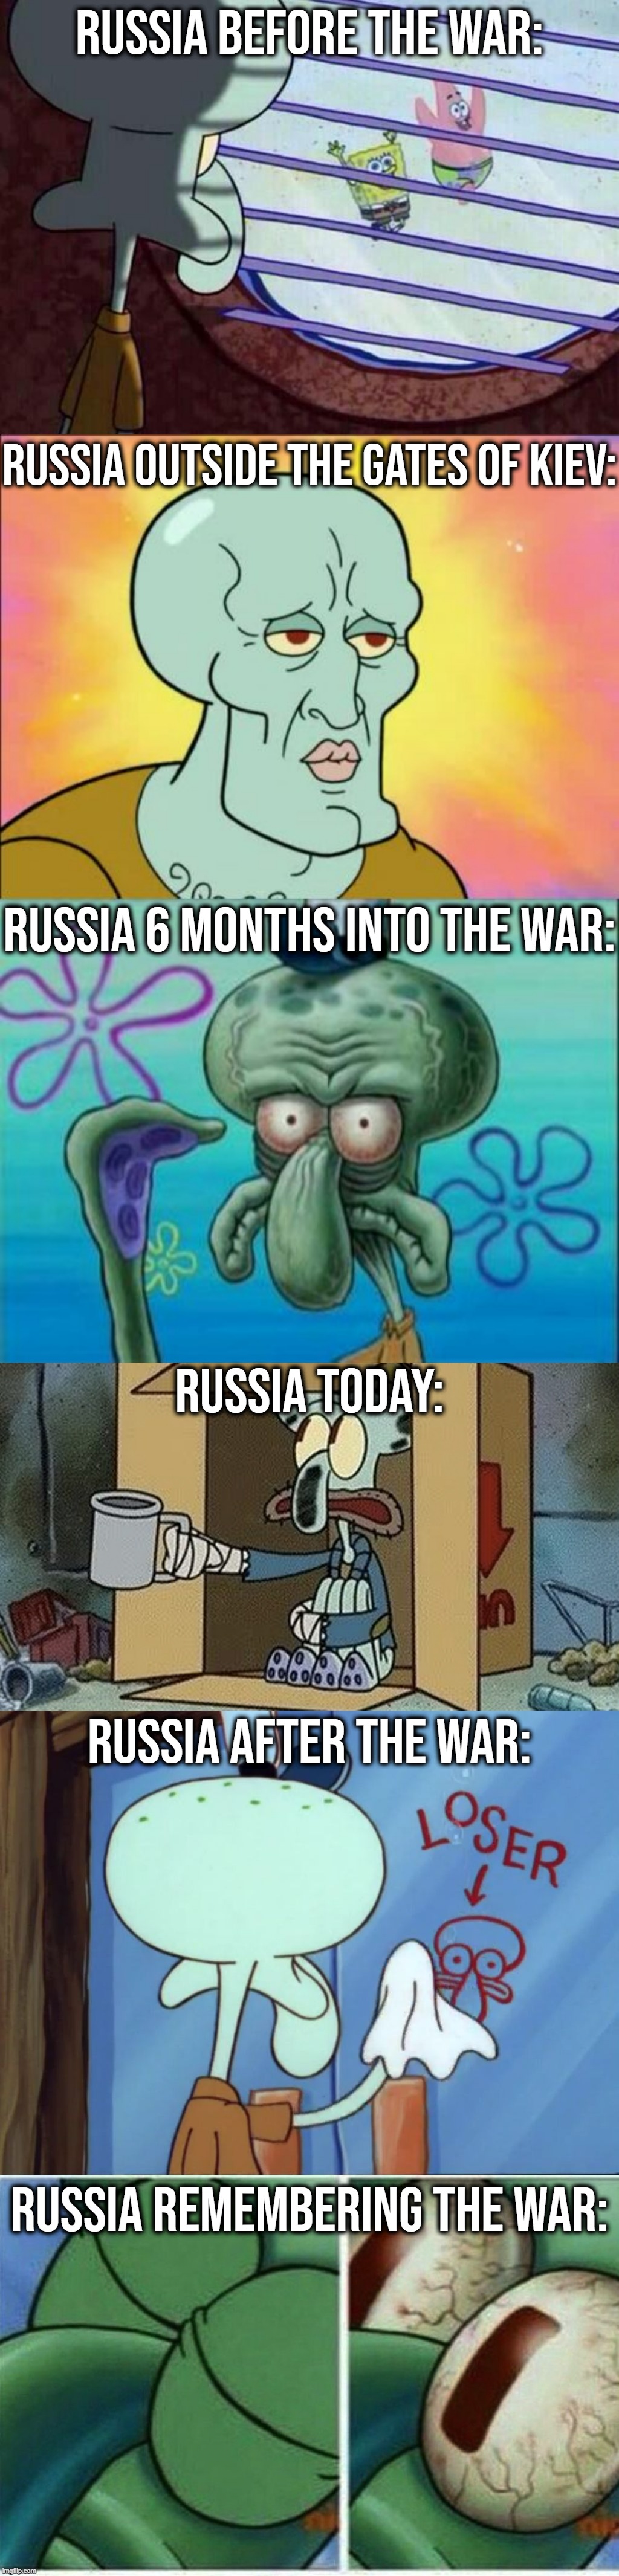 The Russo-Ukrainian War: A Story Told in Squidward | RUSSIA BEFORE THE WAR:; RUSSIA OUTSIDE THE GATES OF KIEV:; RUSSIA 6 MONTHS INTO THE WAR:; RUSSIA TODAY:; RUSSIA AFTER THE WAR:; RUSSIA REMEMBERING THE WAR: | image tagged in squidward window,memes,squidward,squidward spare change,squidward cleaning loser,ukraine | made w/ Imgflip meme maker